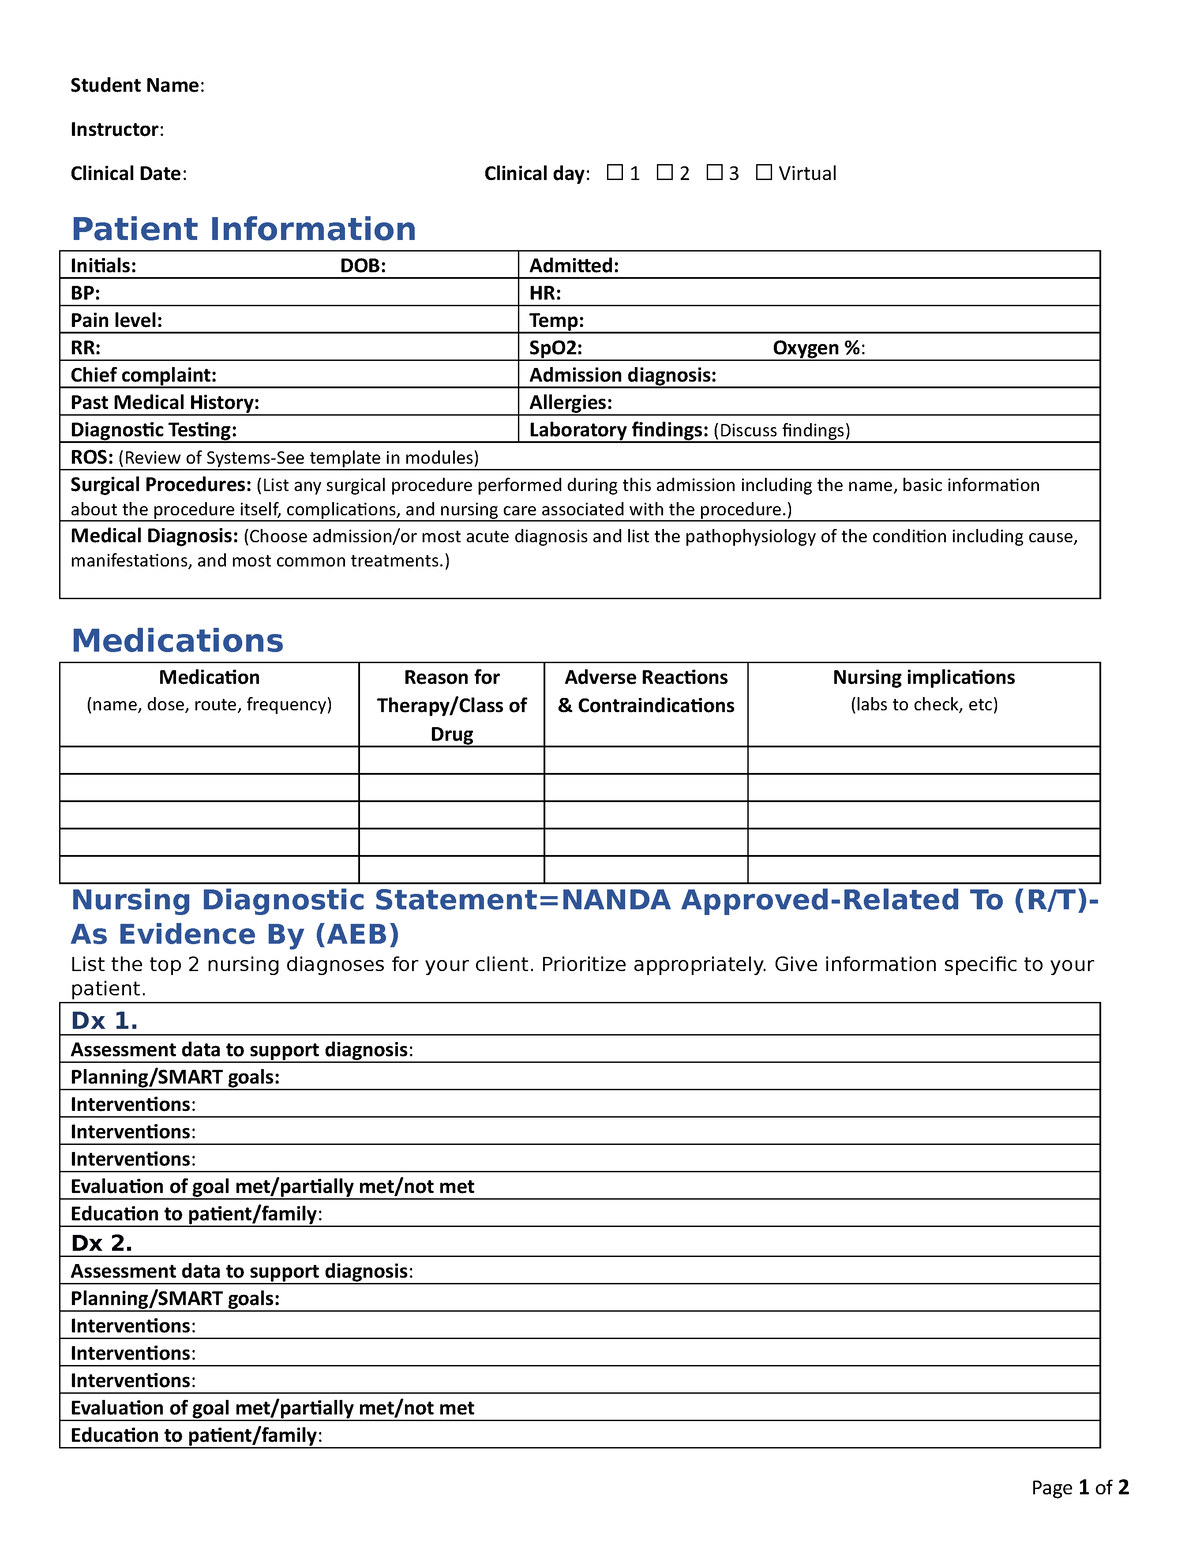 Care Plan Template-1 Physical Assessment - Student Name: Instructor ...